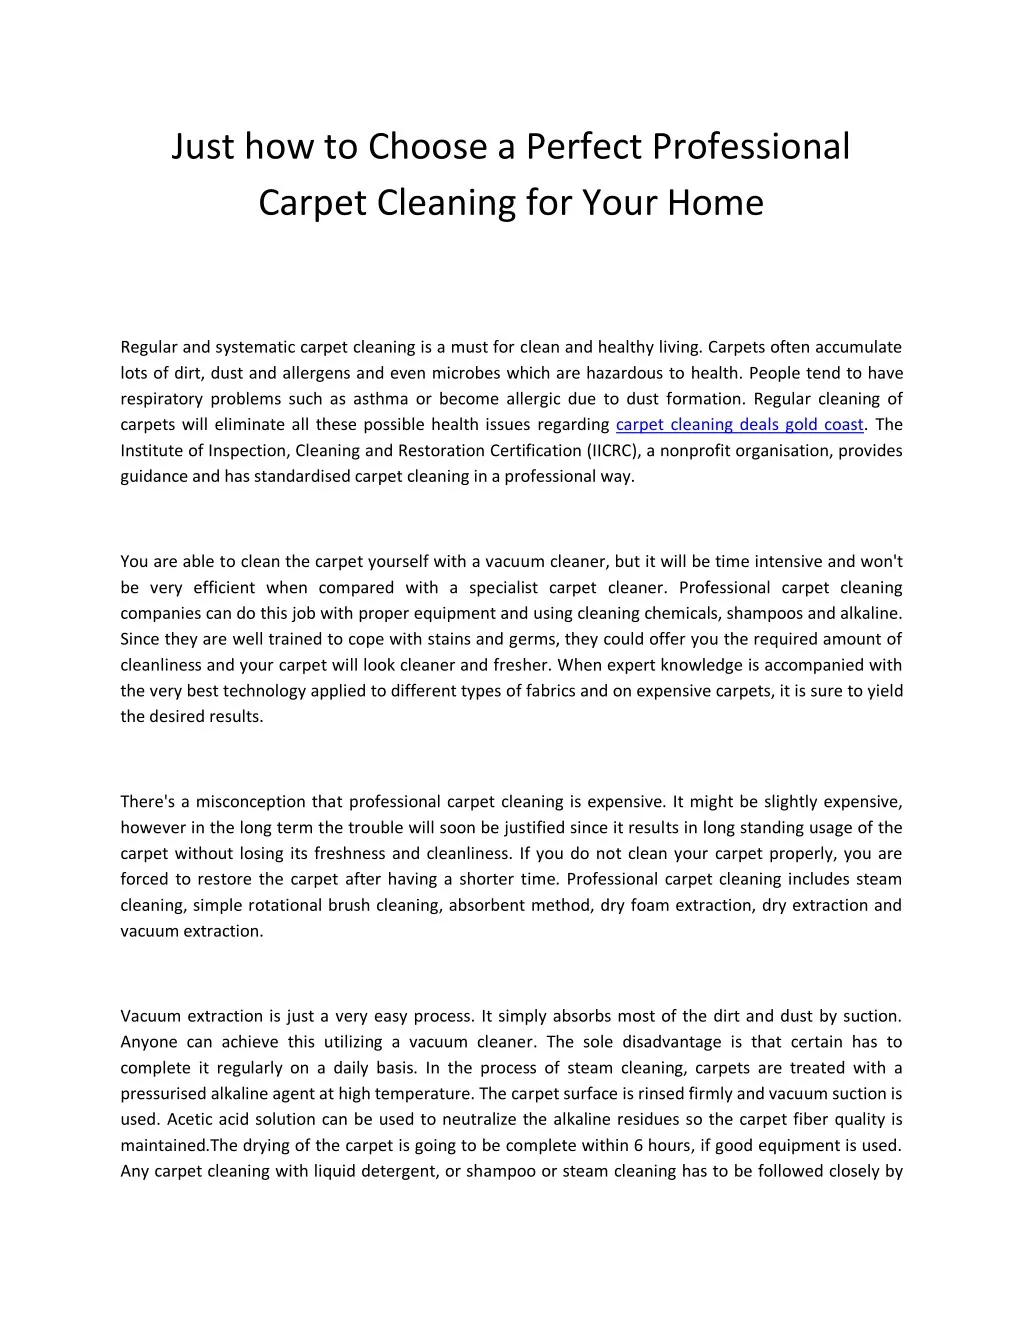 just how to choose a perfect professional carpet